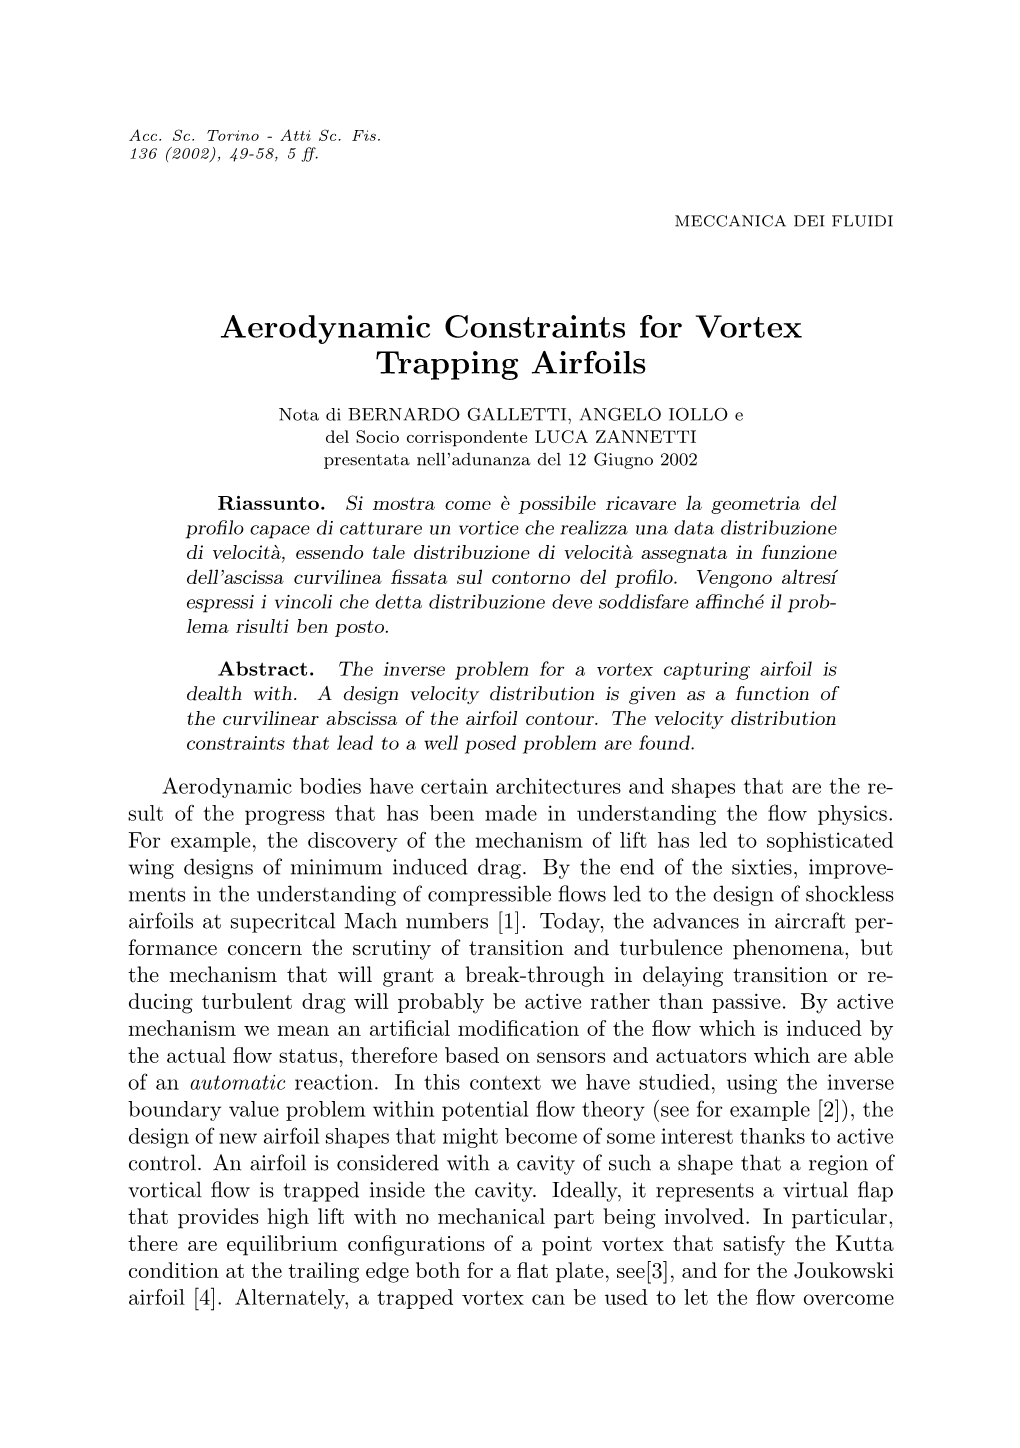 Aerodynamic Constraints for Vortex Trapping Airfoils